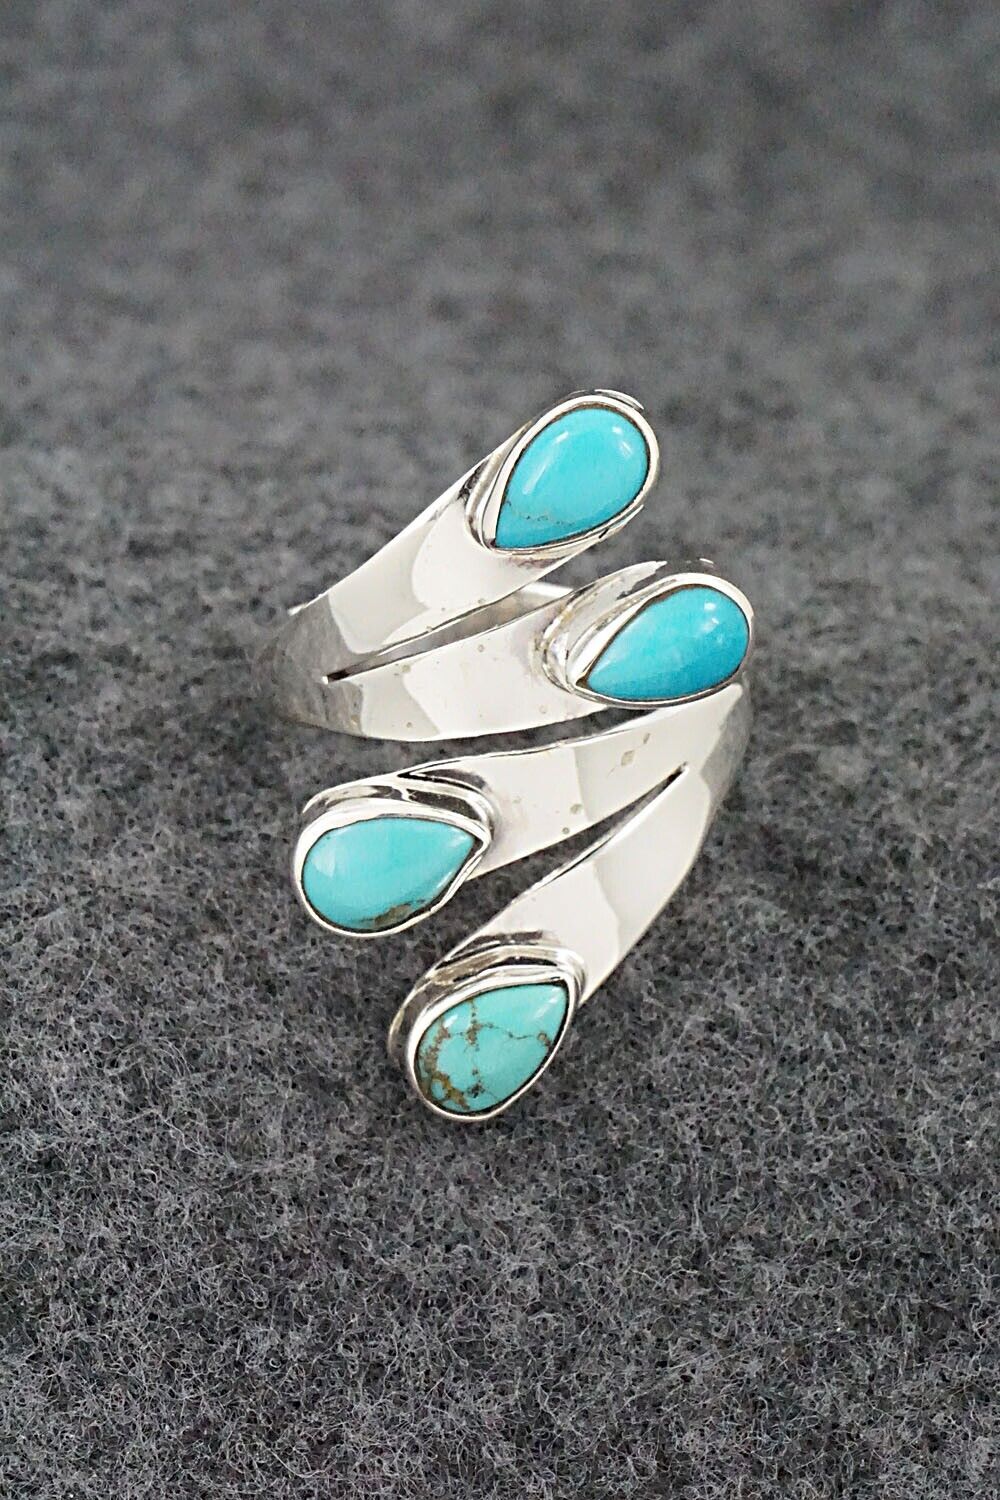 Turquoise & Sterling Silver Ring - Thomas Yazzie - Size 6.5